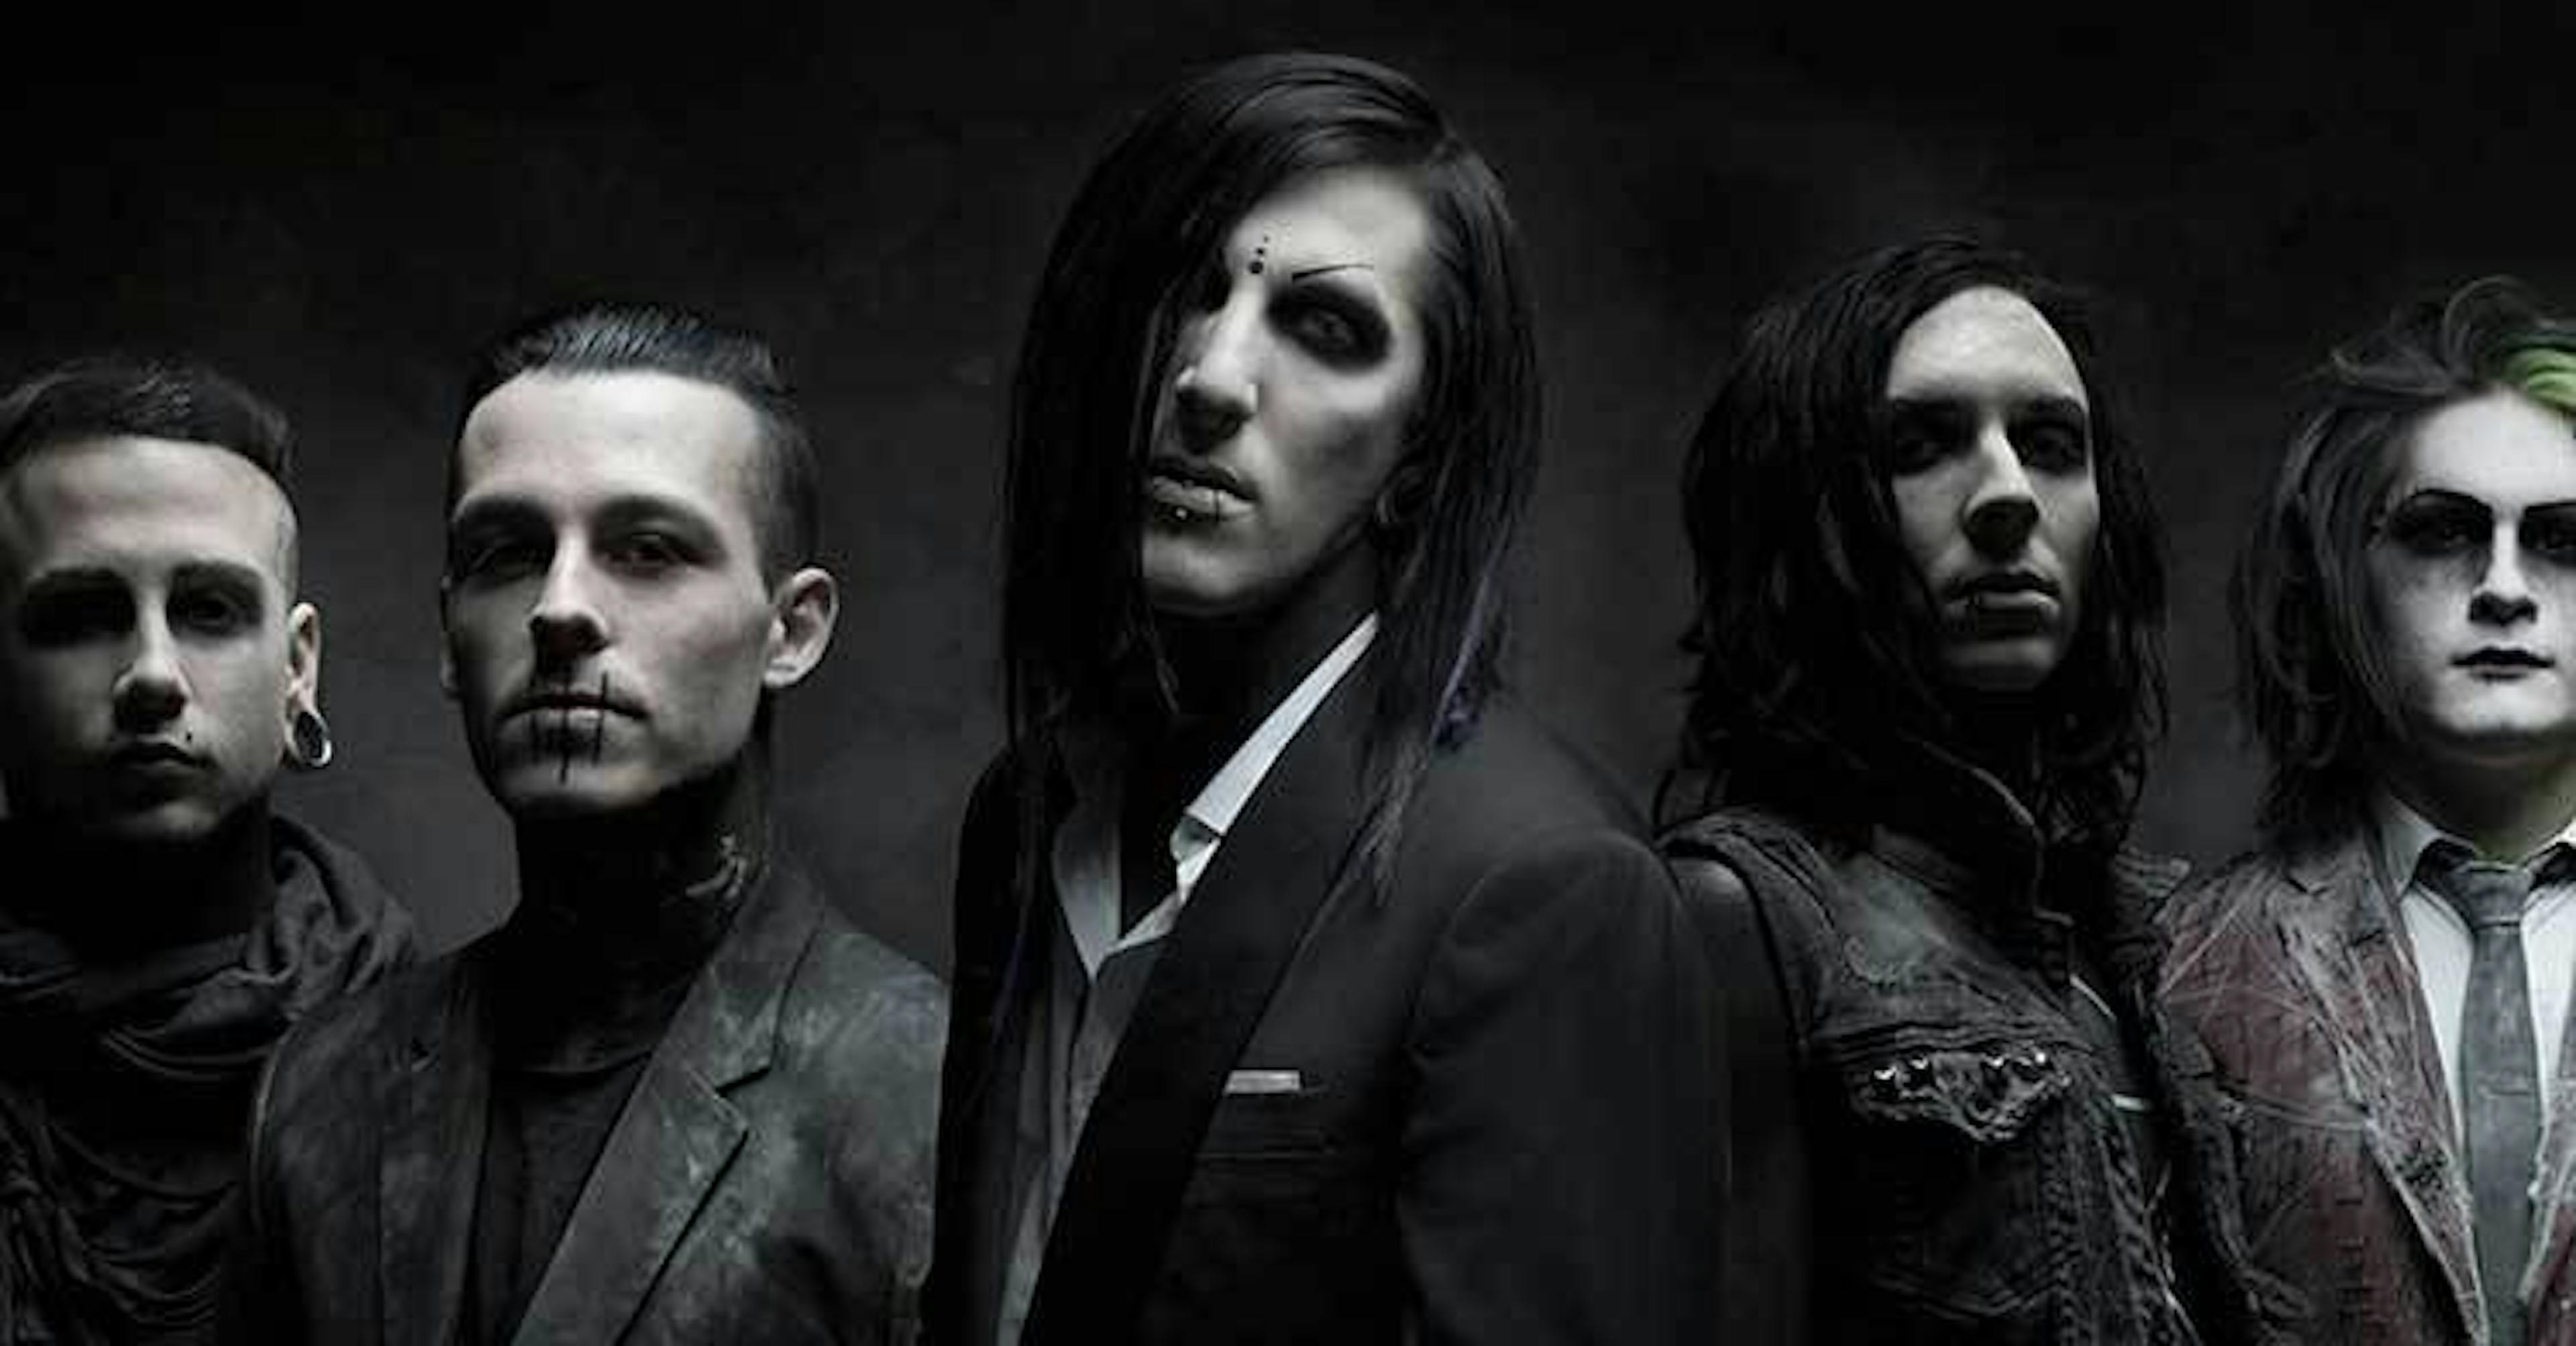 Motionless In White Have A New Song